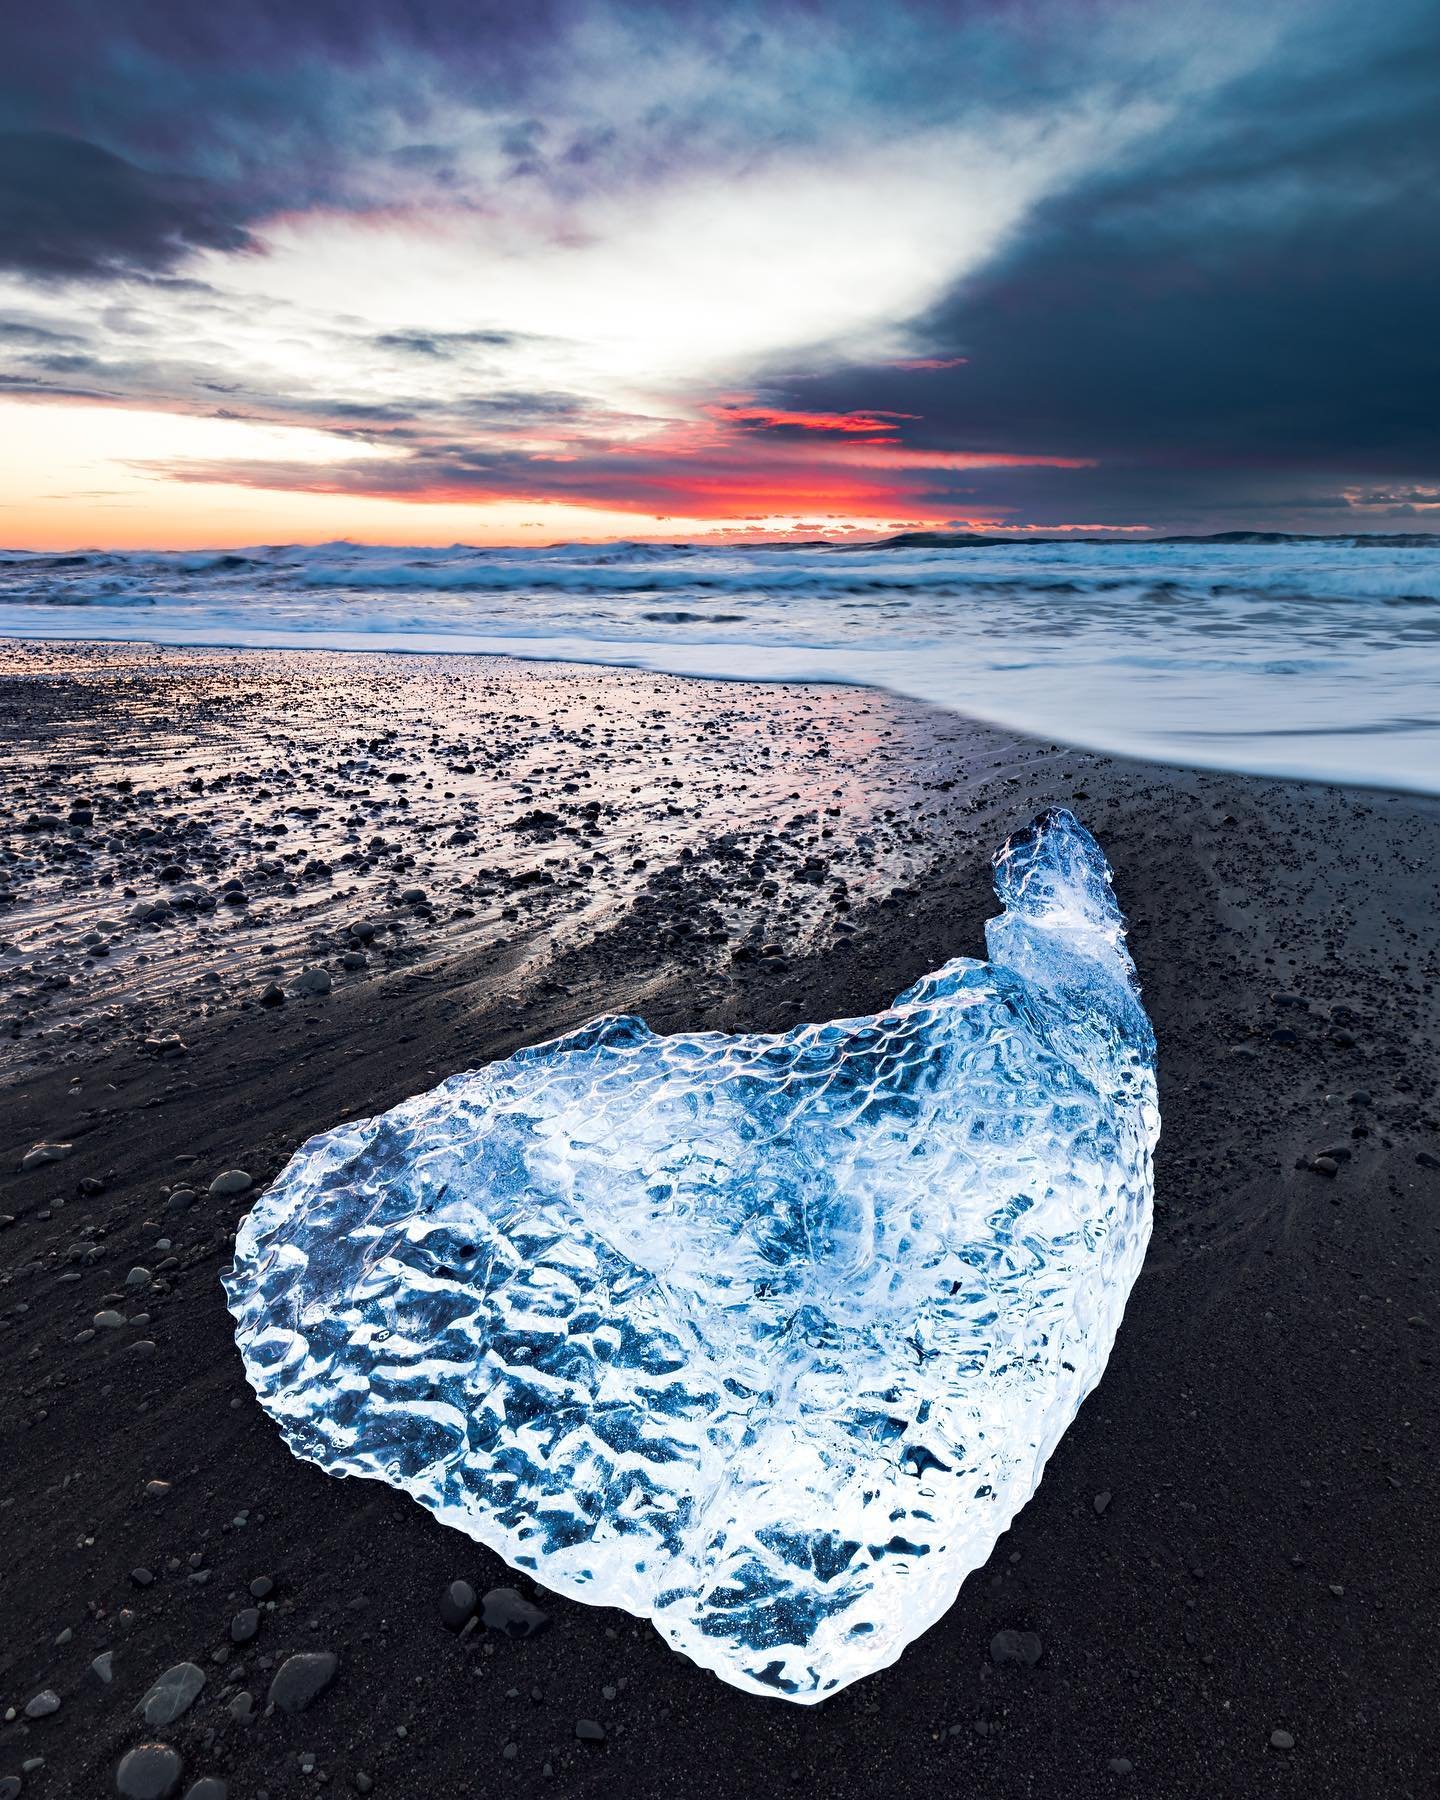 Diamond beach, Iceland 💎🇮🇸🌄

The &ldquo;diamonds&rdquo; on Diamond Beach are caused from chunks of the Vatnaj&ouml;kull Glacier breaking off into the ocean, where waves and sand polishes them before they wash ashore. 

This incredible natural pro